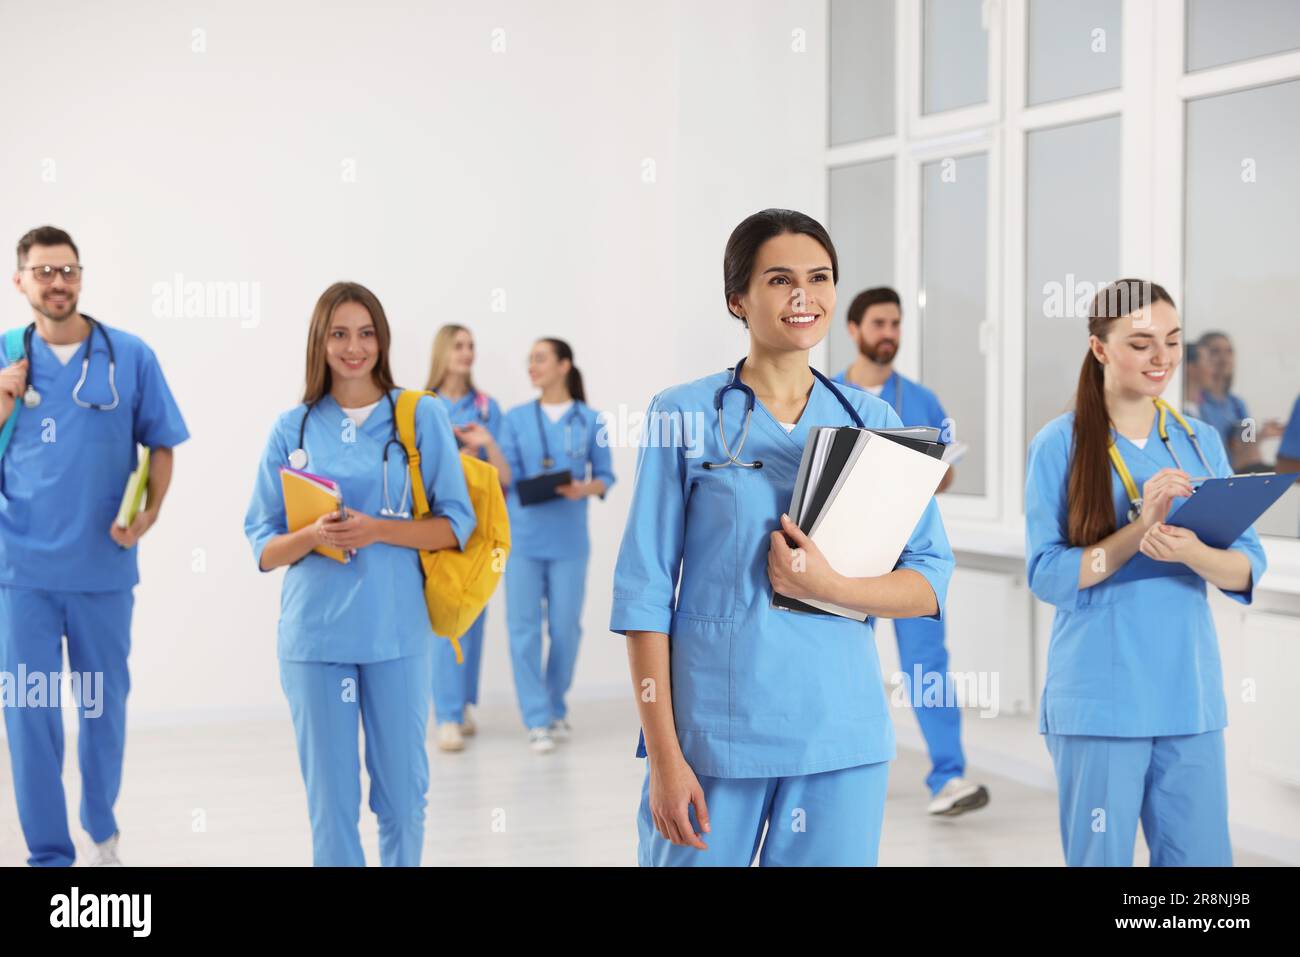 Group of medical students in college hallway Stock Photo